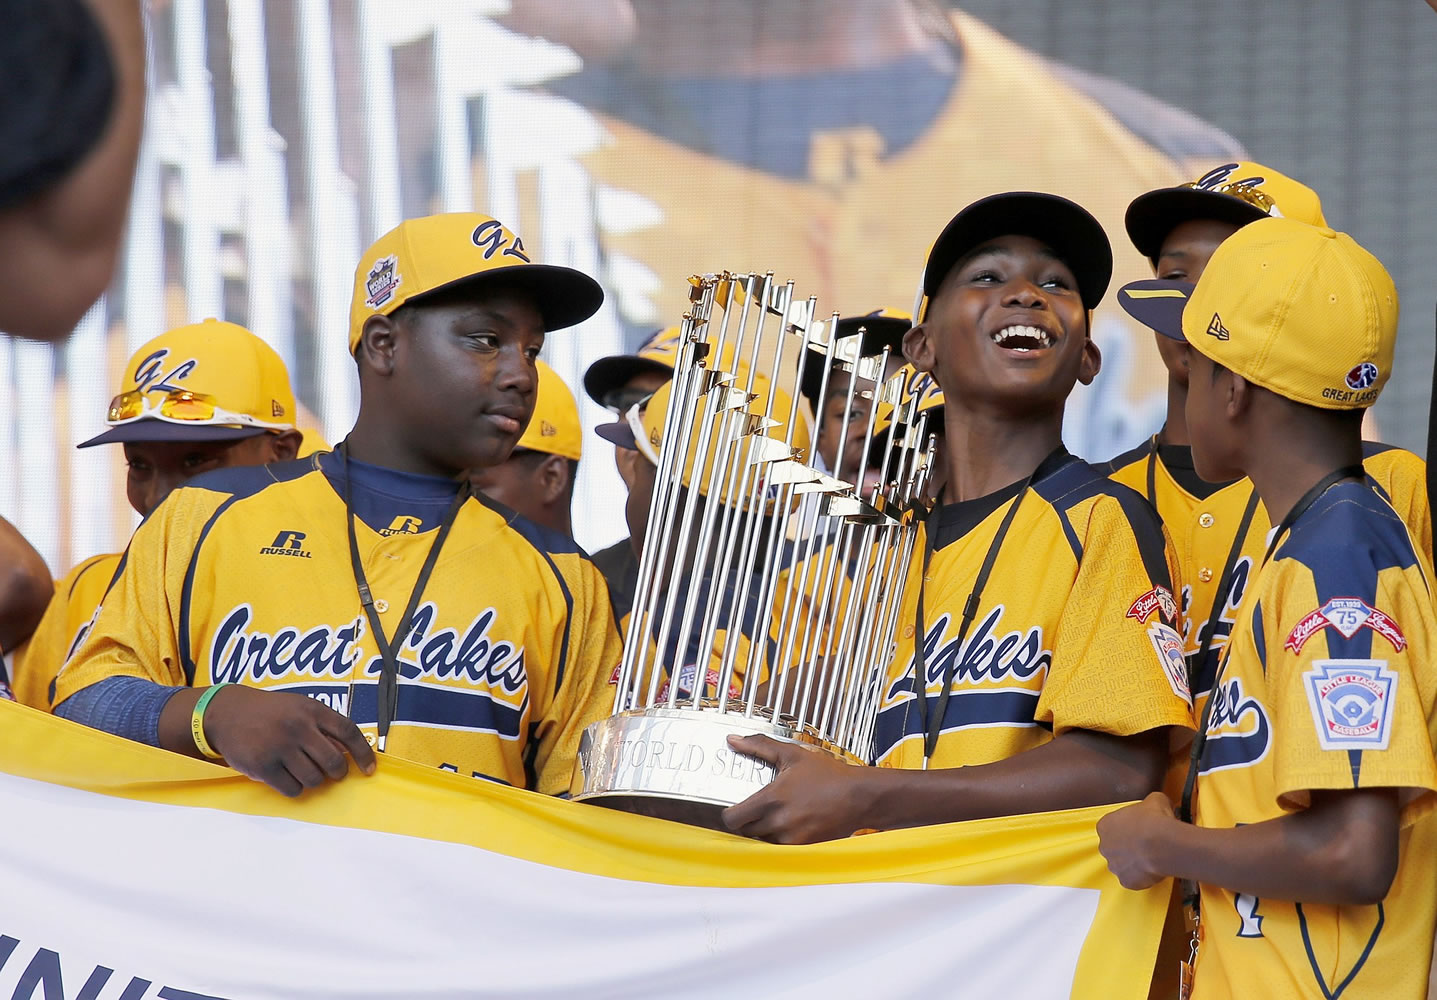 In this Aug. 27, 2014, file photo, members of the Jackie Robinson West Little League baseball team participate in a rally in Chicago celebrating the team's U.S. Little League Championship. Little League International has stripped Chicago's Jackie Robinson West team of its national title after finding the team falsified its boundary map. The league made the announcement Wednesday morning, Feb. 11, 2015, saying the Chicago team violated regulations by placing players on the team who didn?t qualify because they lived outside the team?s boundaries.